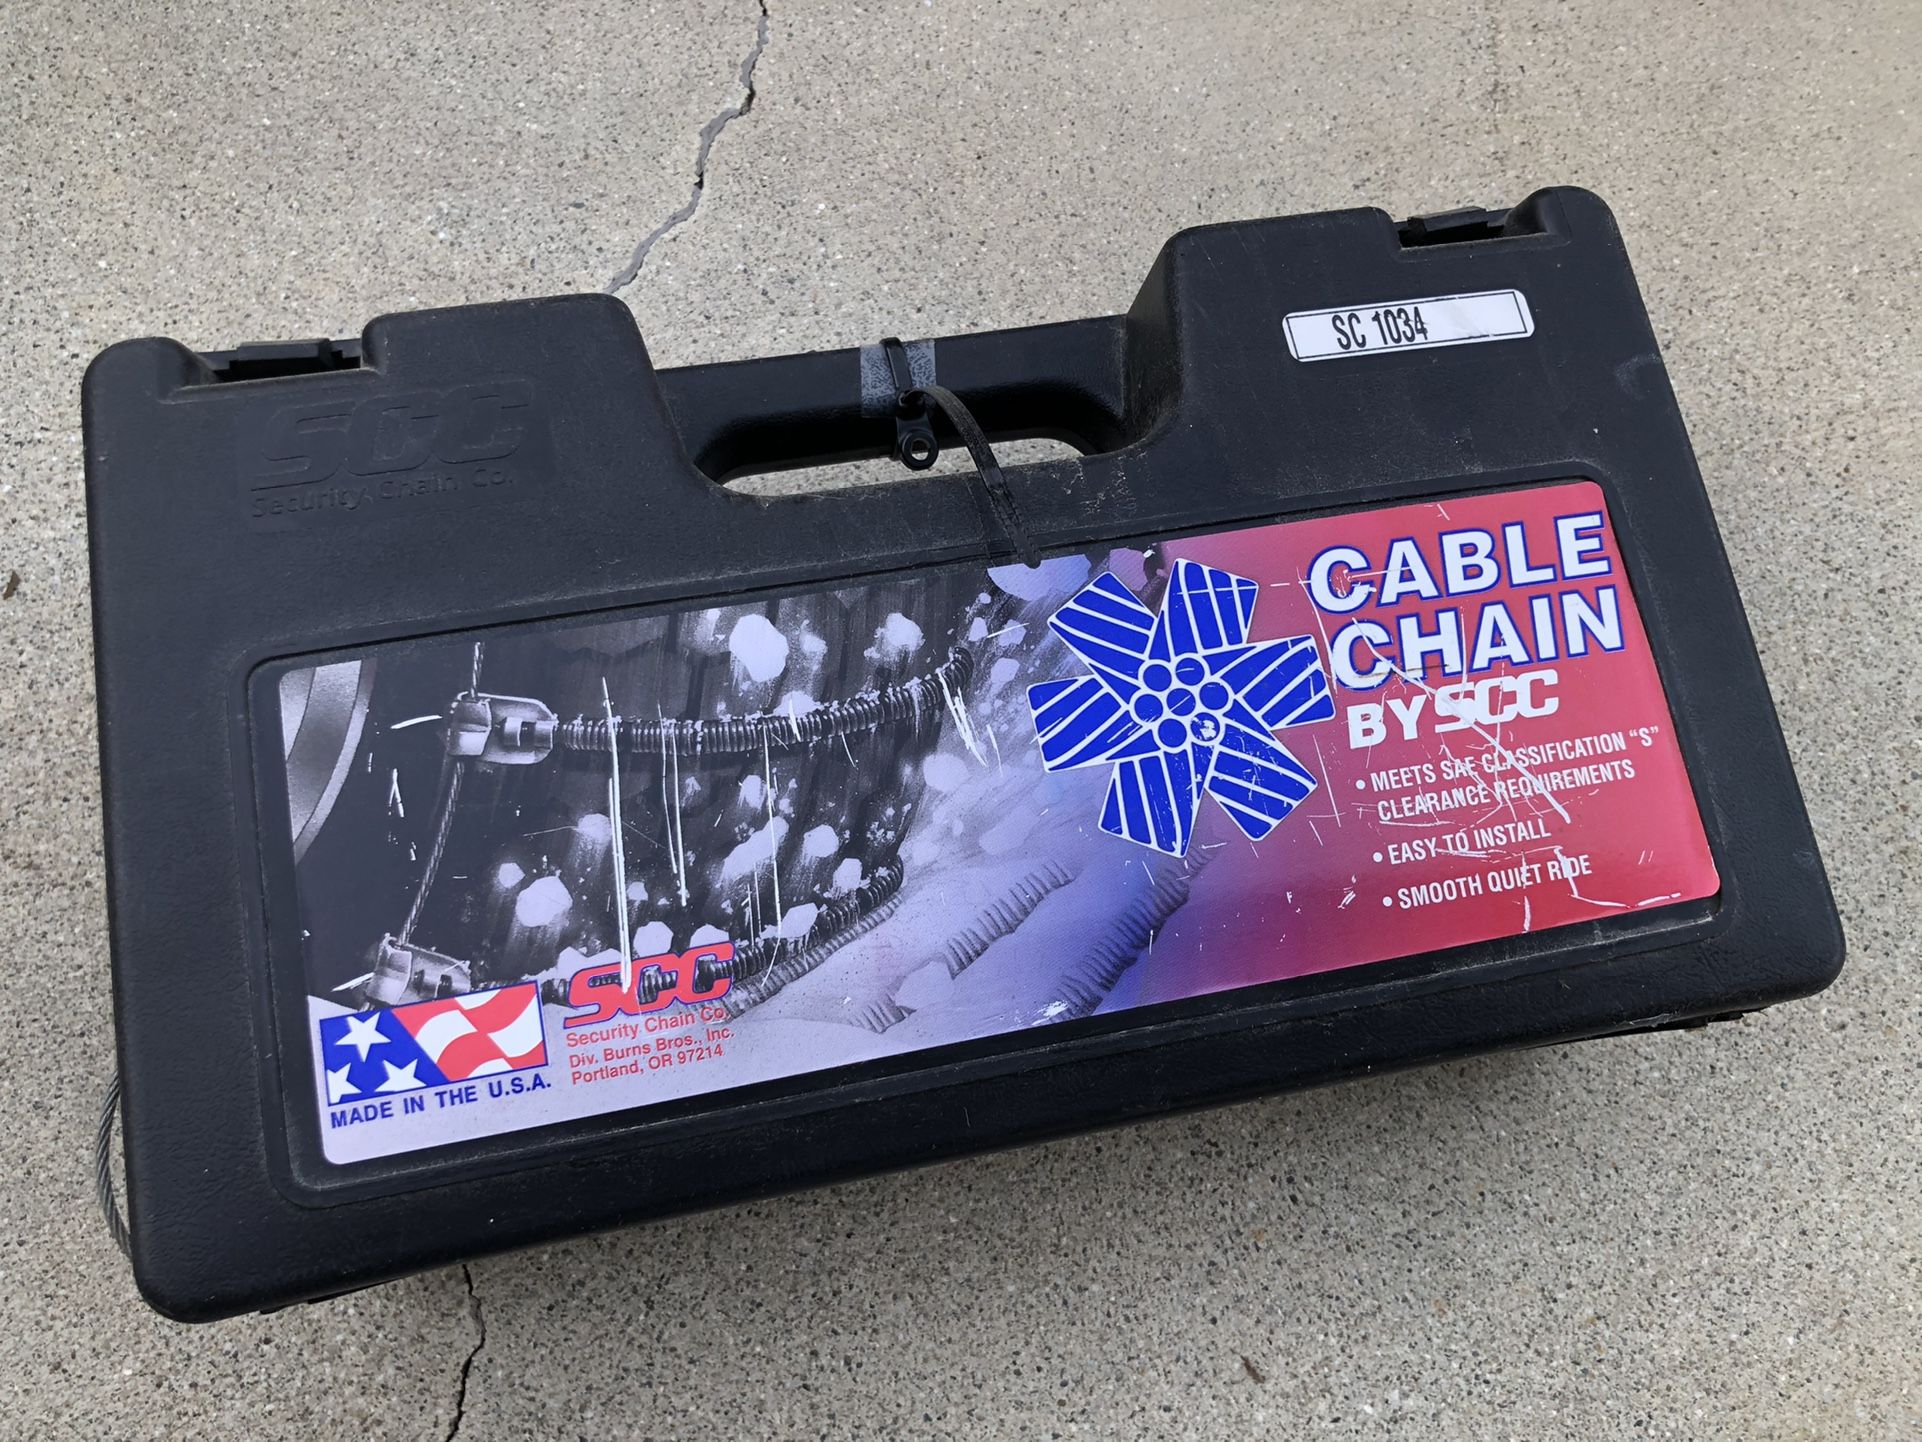 (Brand new) Security Chain Company SC1034 Radial Chain Cable Traction Tire Chain